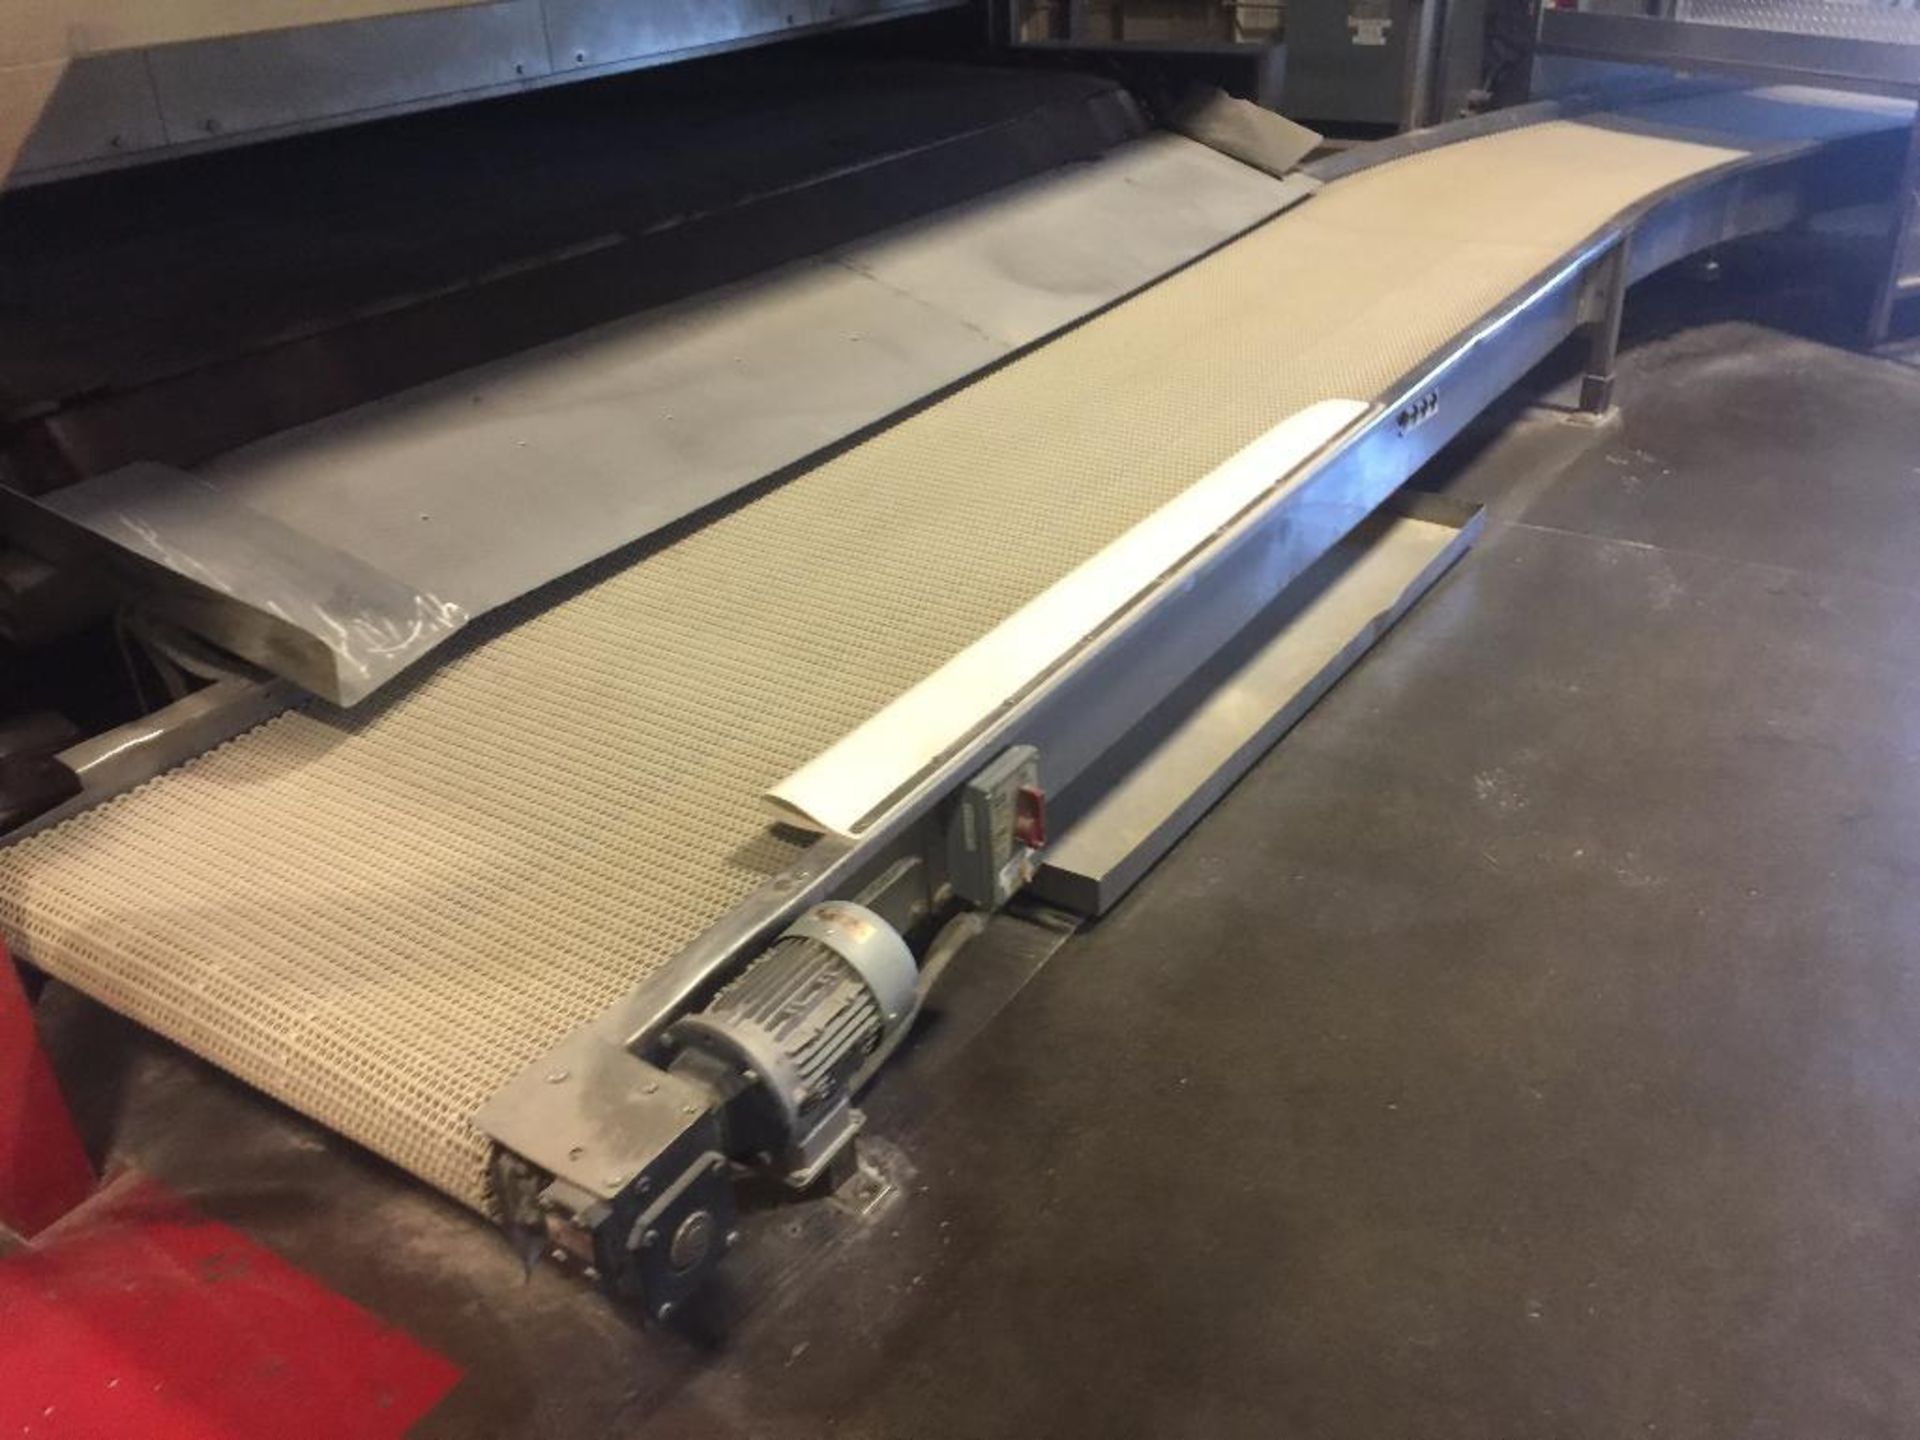 SS conveyor, 180 degree turn, 30 ft. x 36 in. wide, plastic chain belt, (2) drives, for ambient cool - Image 2 of 5